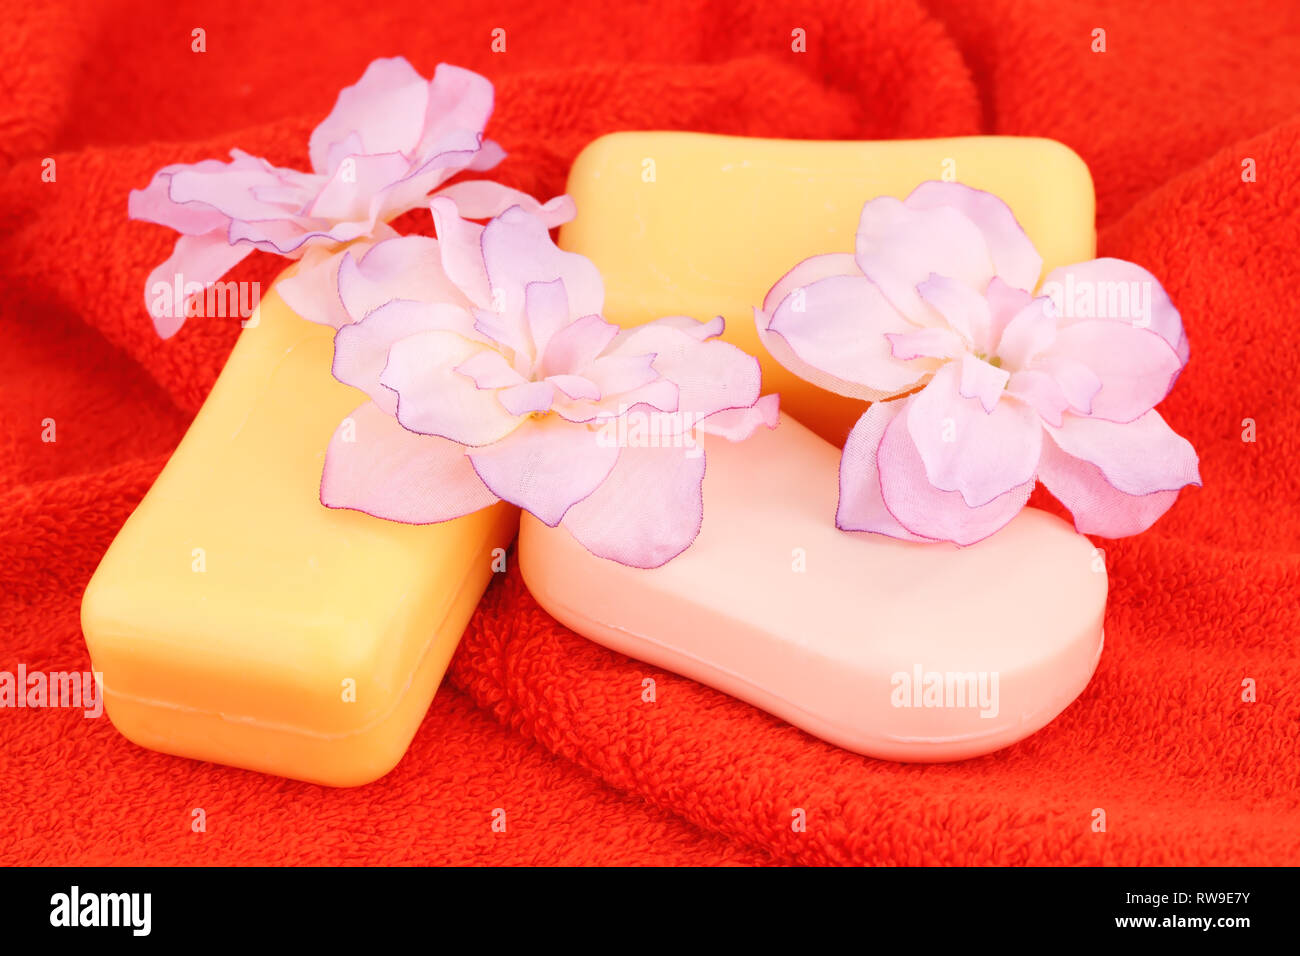 Colorful soaps and flowers on red towel. Stock Photo